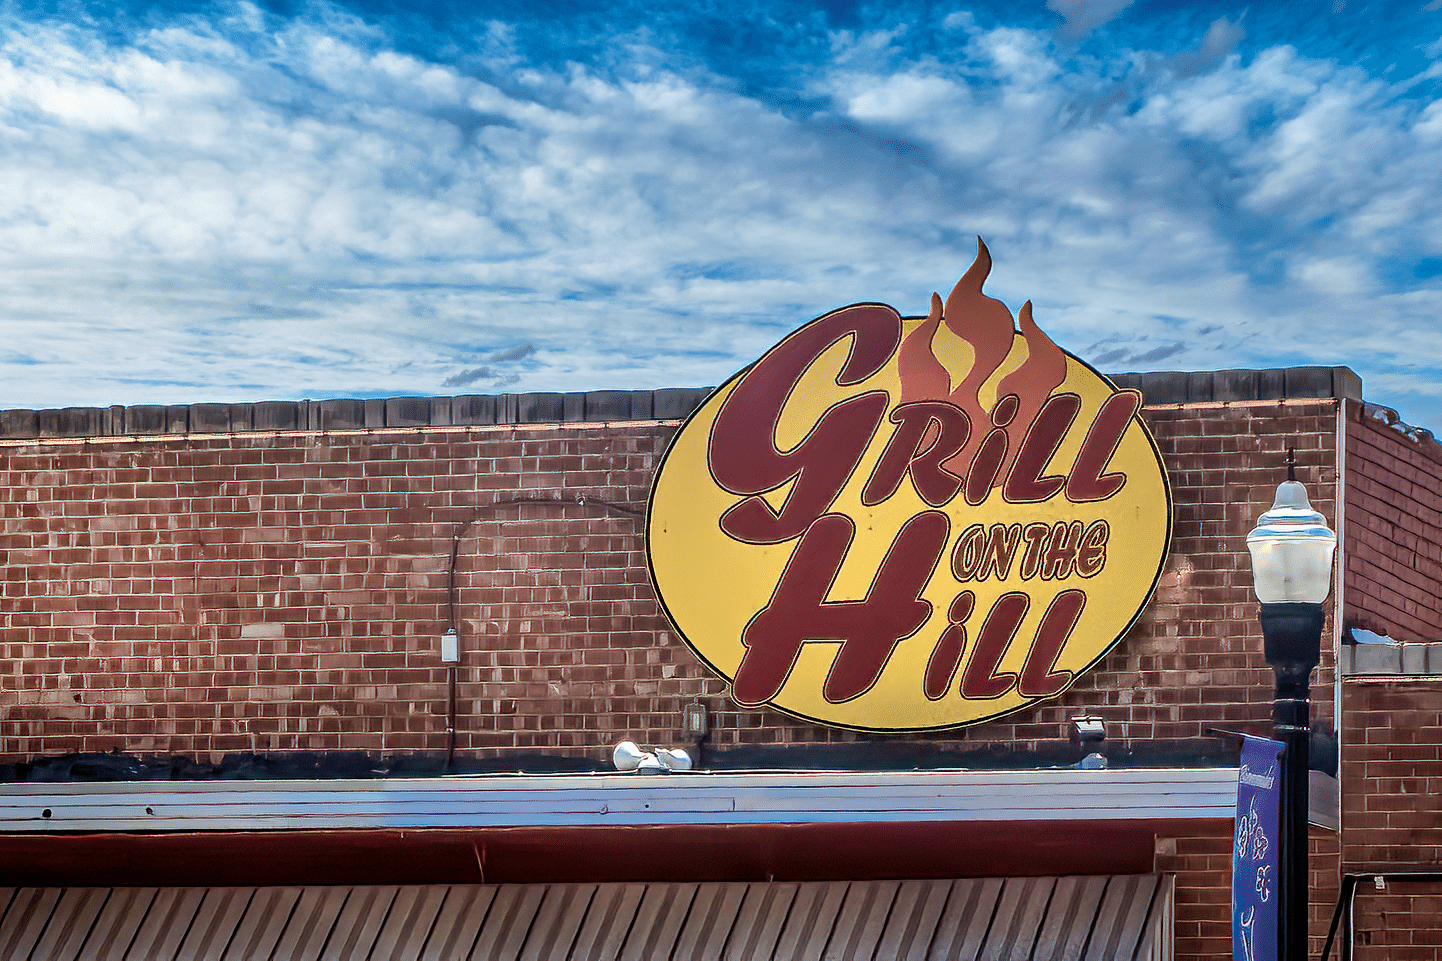 A brick building featuring a prominent sign displaying "grill on the hill.